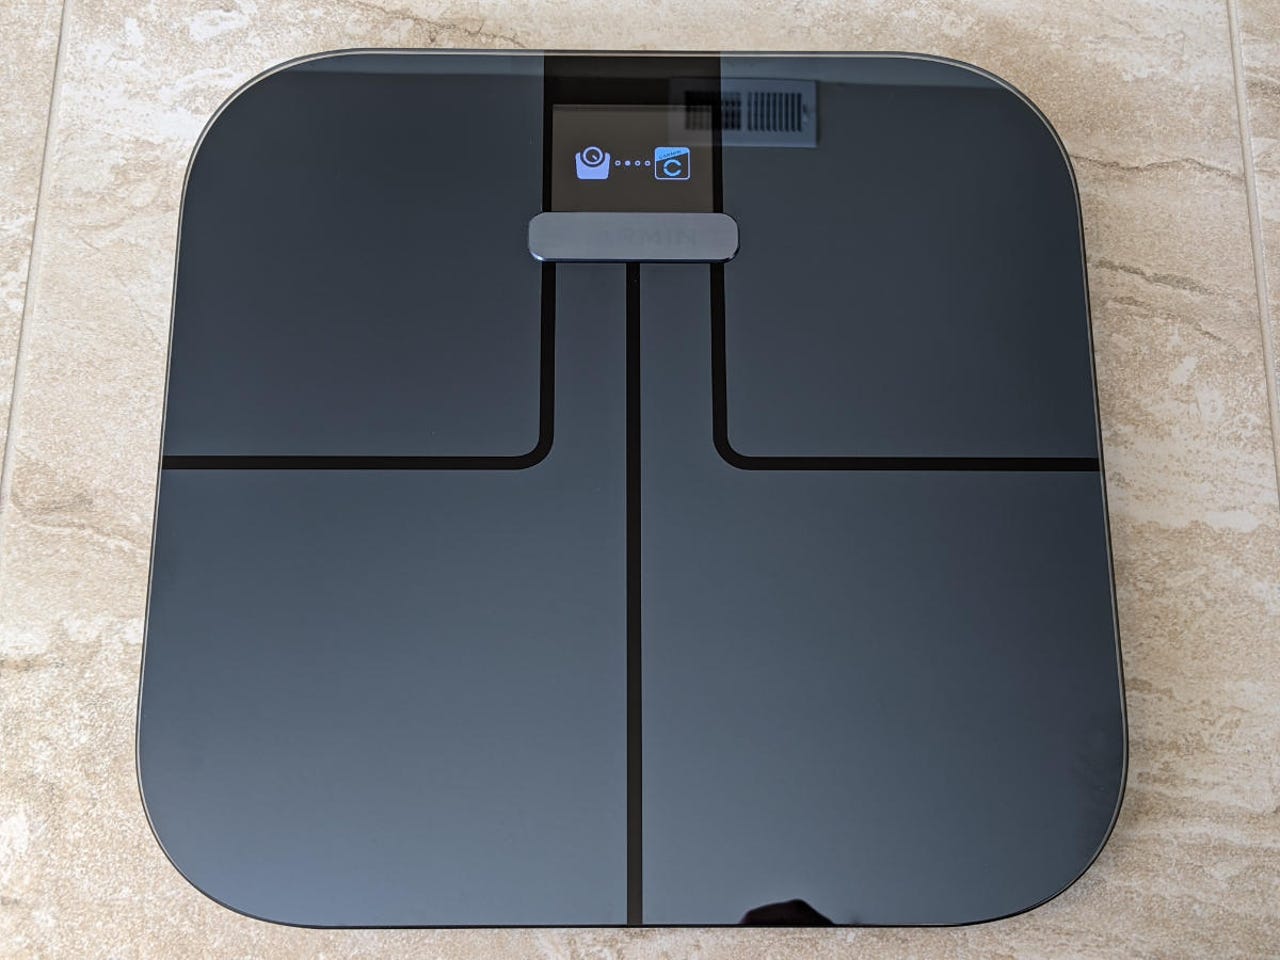 Garmin Index S2 smart scale review: Weight and body metric data help inform  your progress